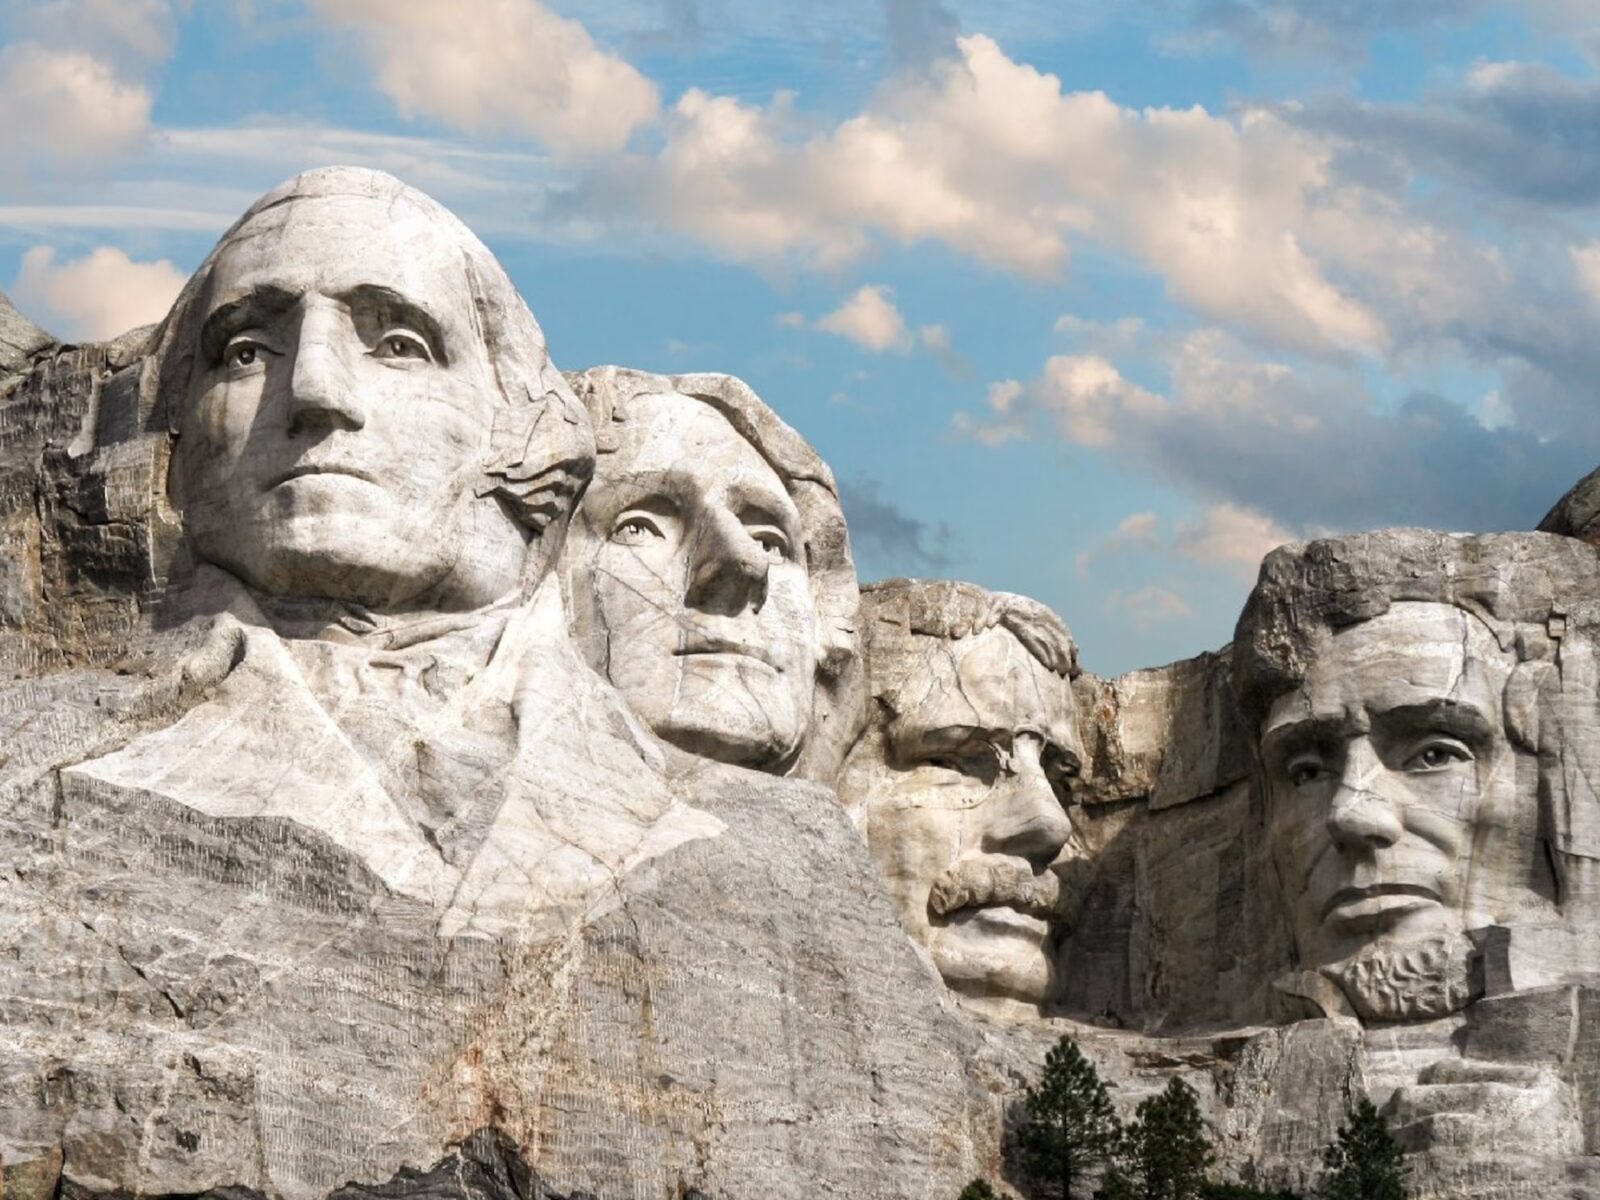 Which Part Of The US Are You From? Mount Rushmore, South Dakota